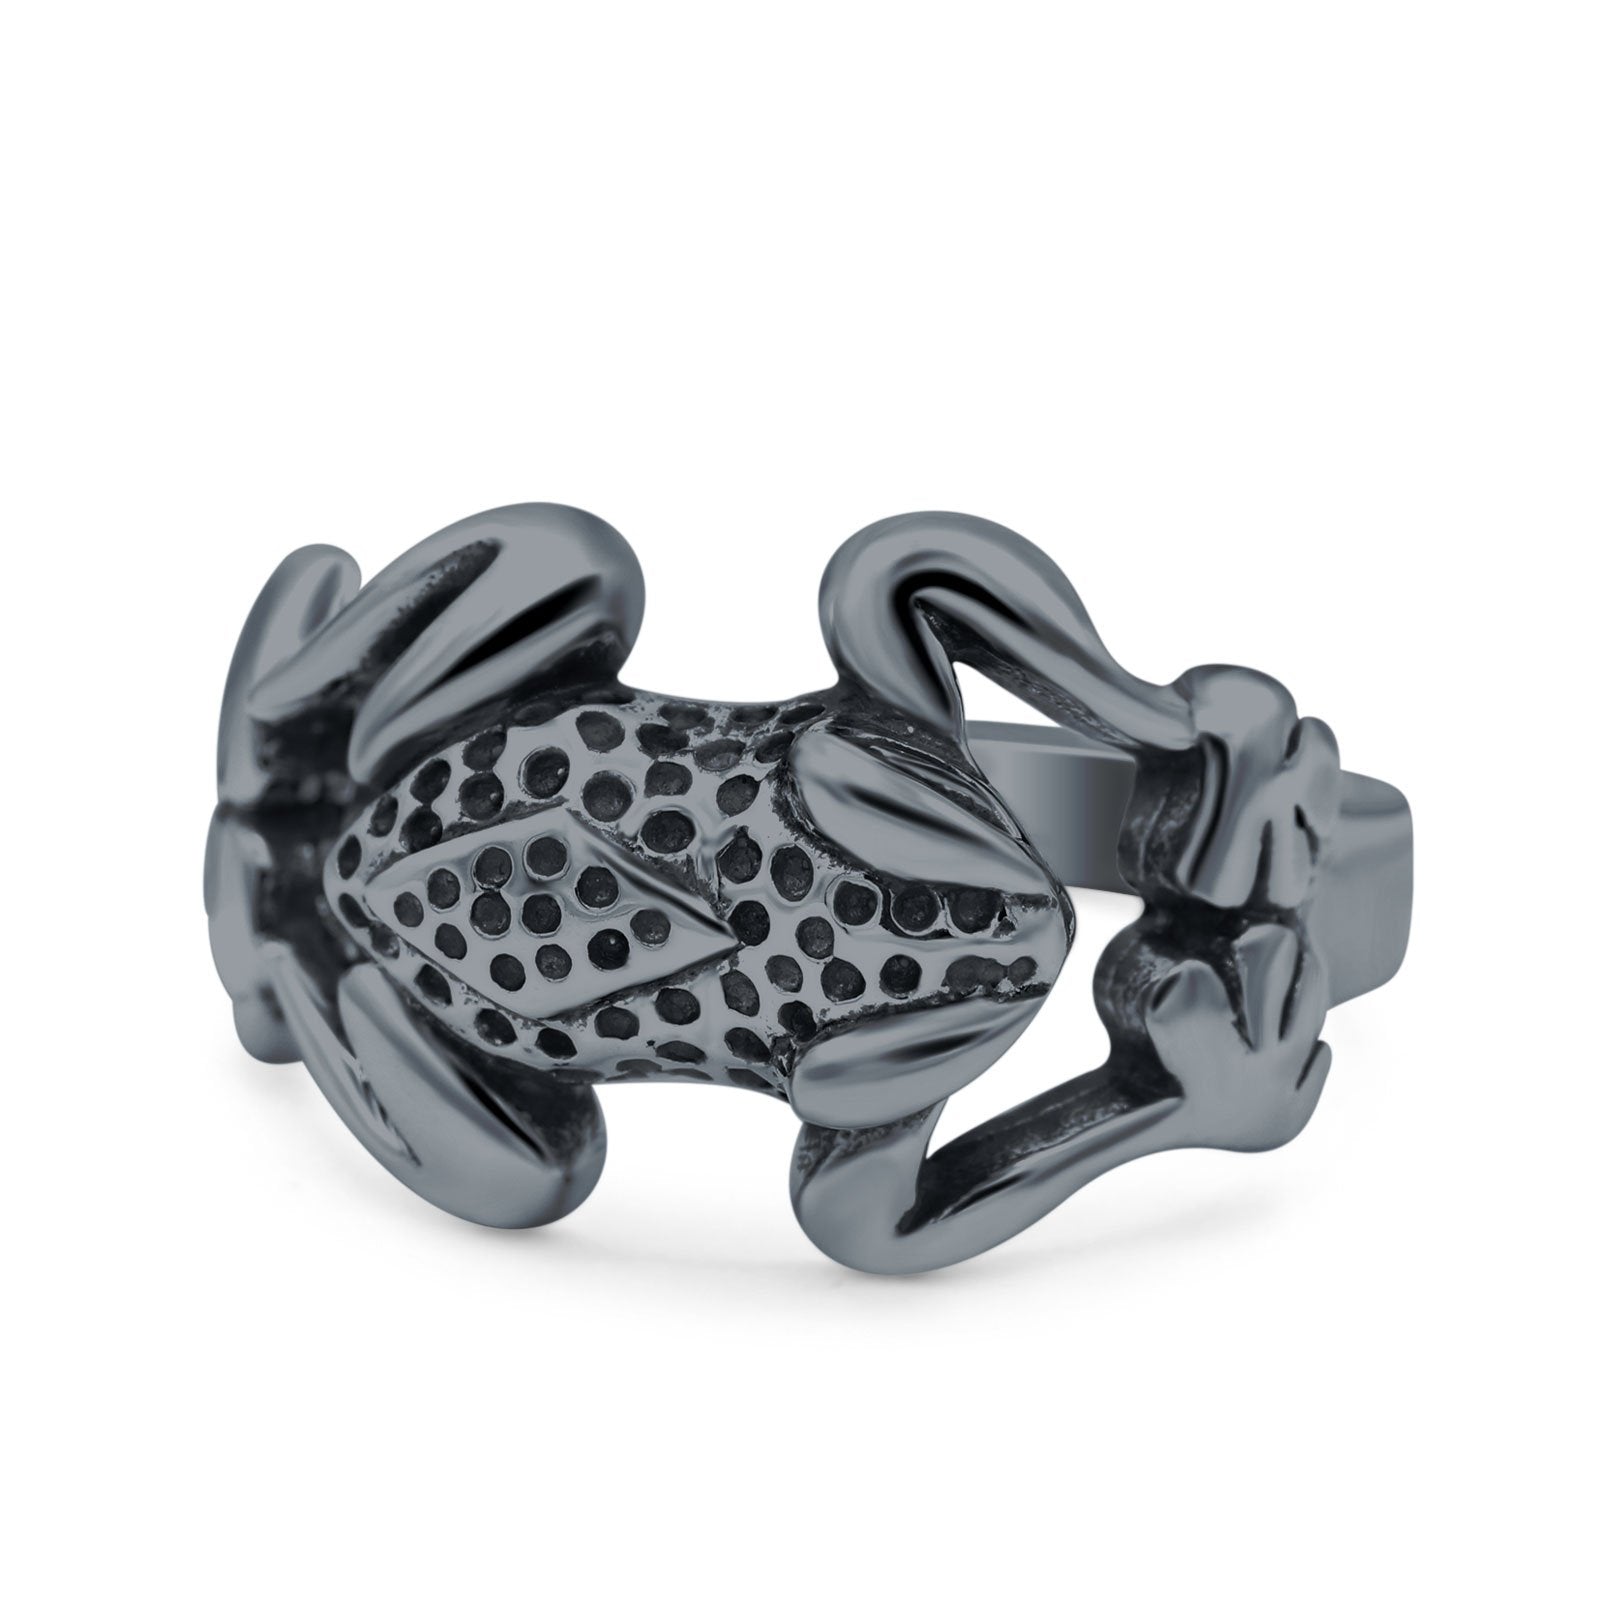 Frog Oxidized Band Ring Solid 925 Sterling Silver (13mm)